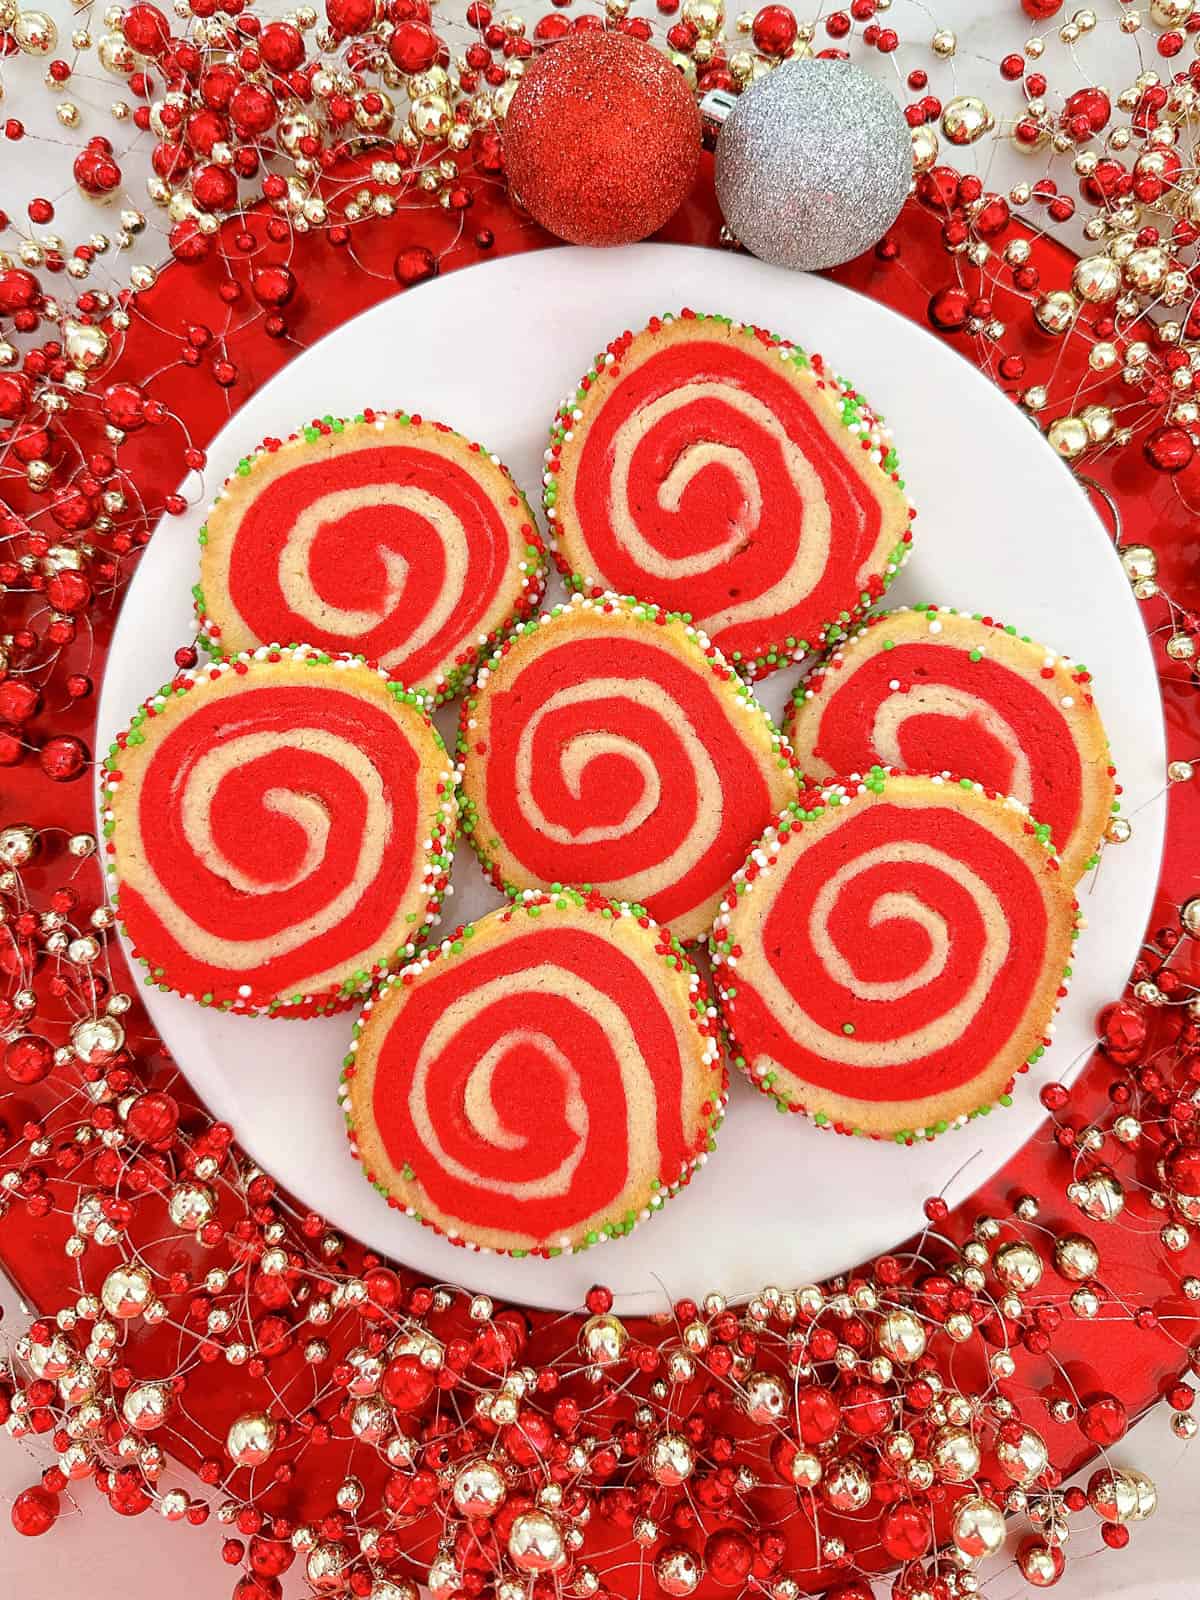 Thermomix Pinwheel Cookies on a plate.